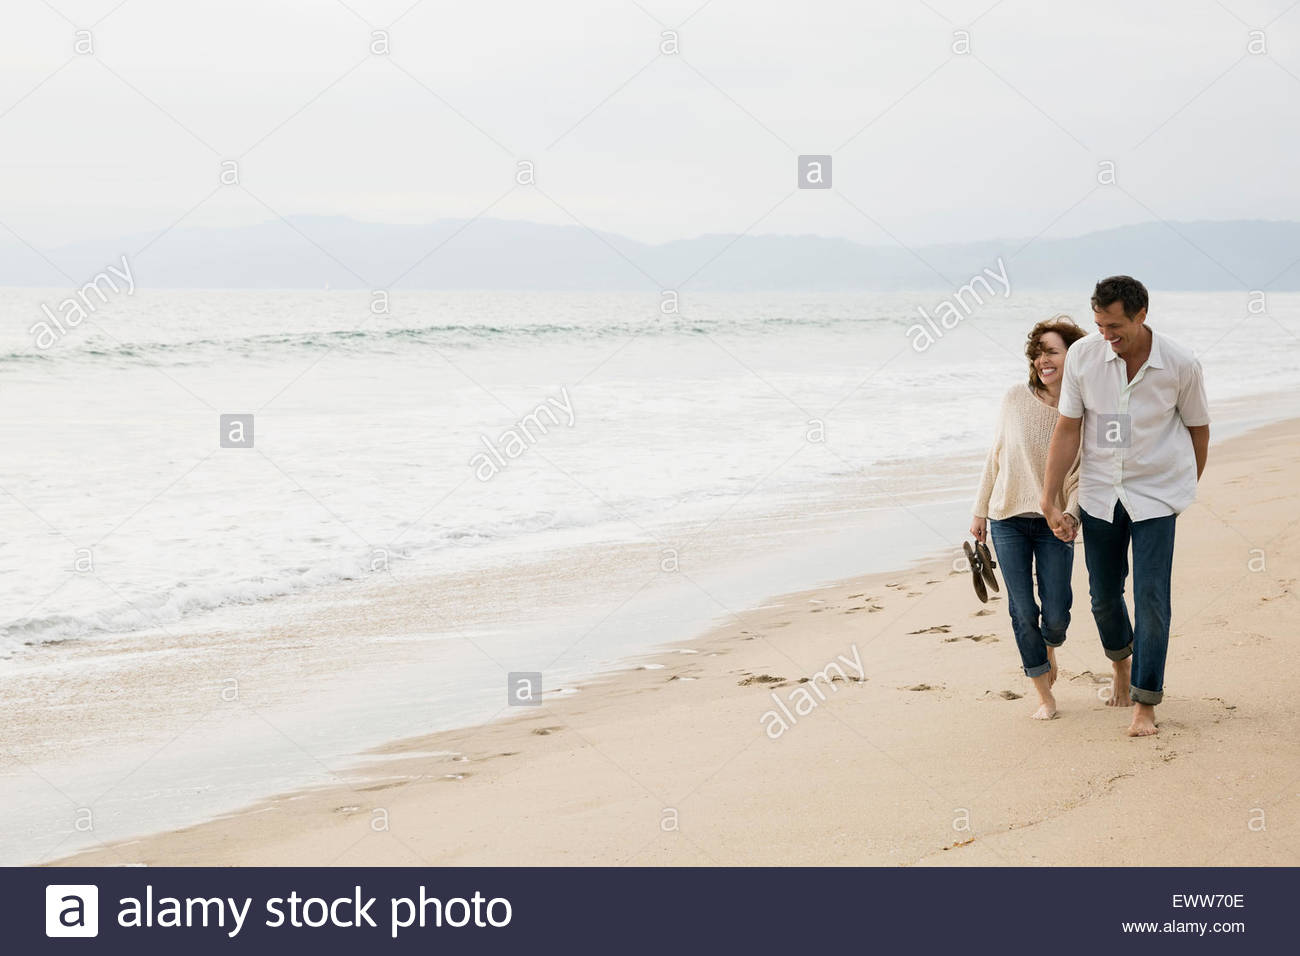 Couple holding hands and walking on beach Banque D'Images